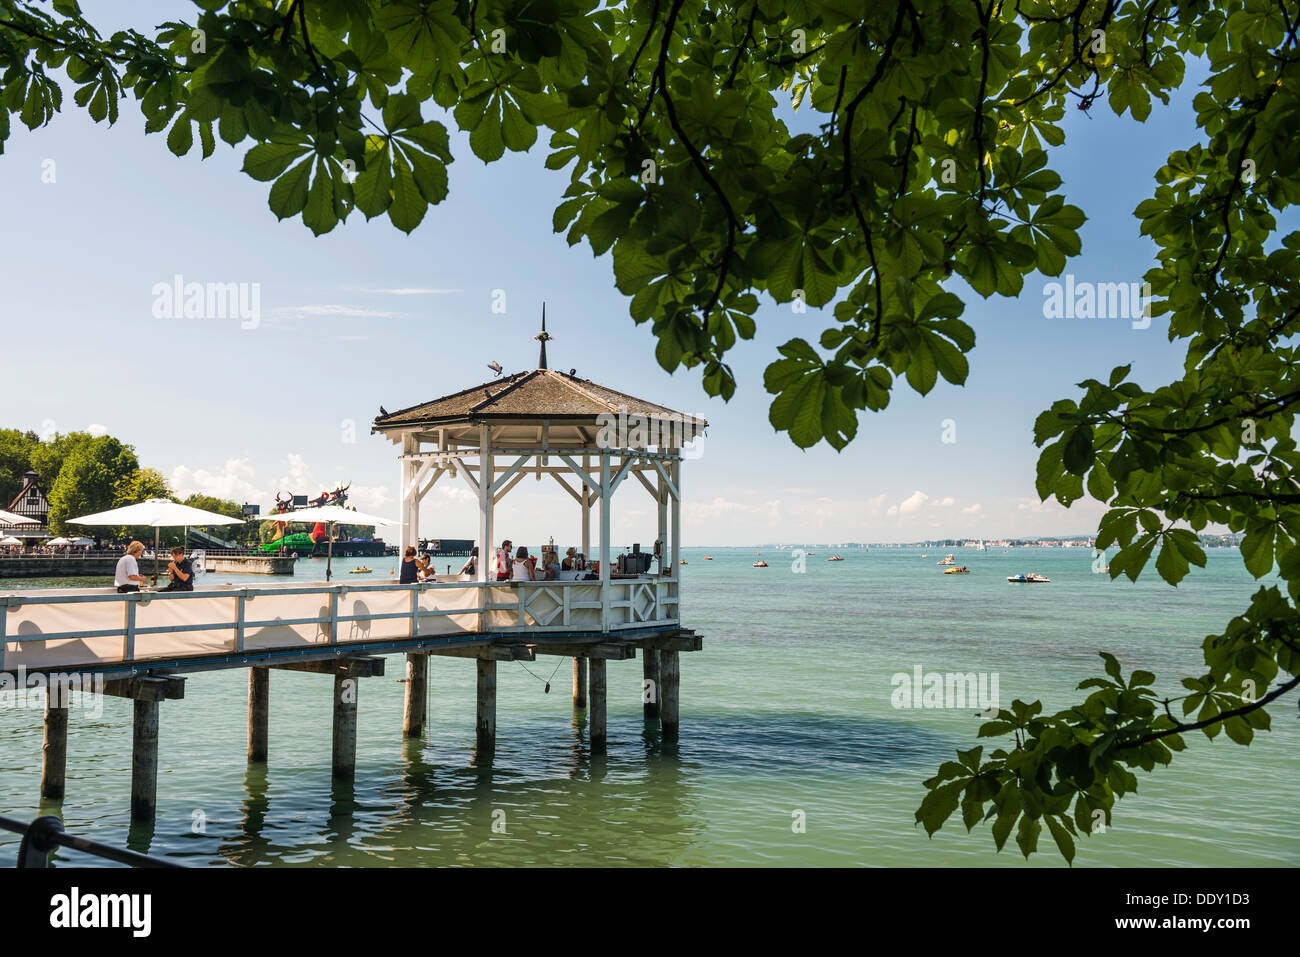 Pavilion with a bar on Lake Constance Stock Photo